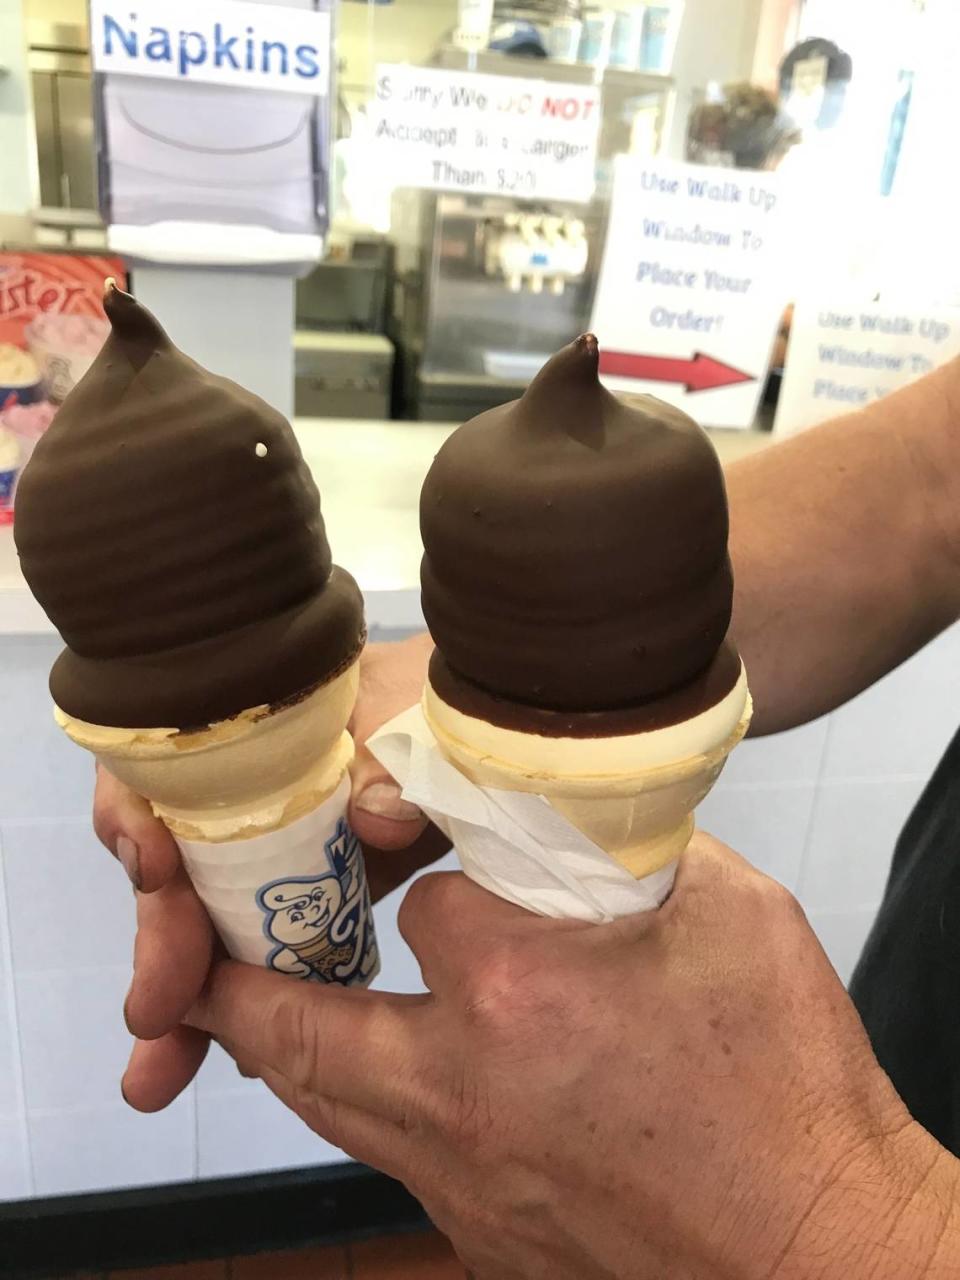 If one dessert can be said to symbolize Fosters Freeze, it might be the chain restaurant’s soft-serve ice cream cones dipped in chocolate.